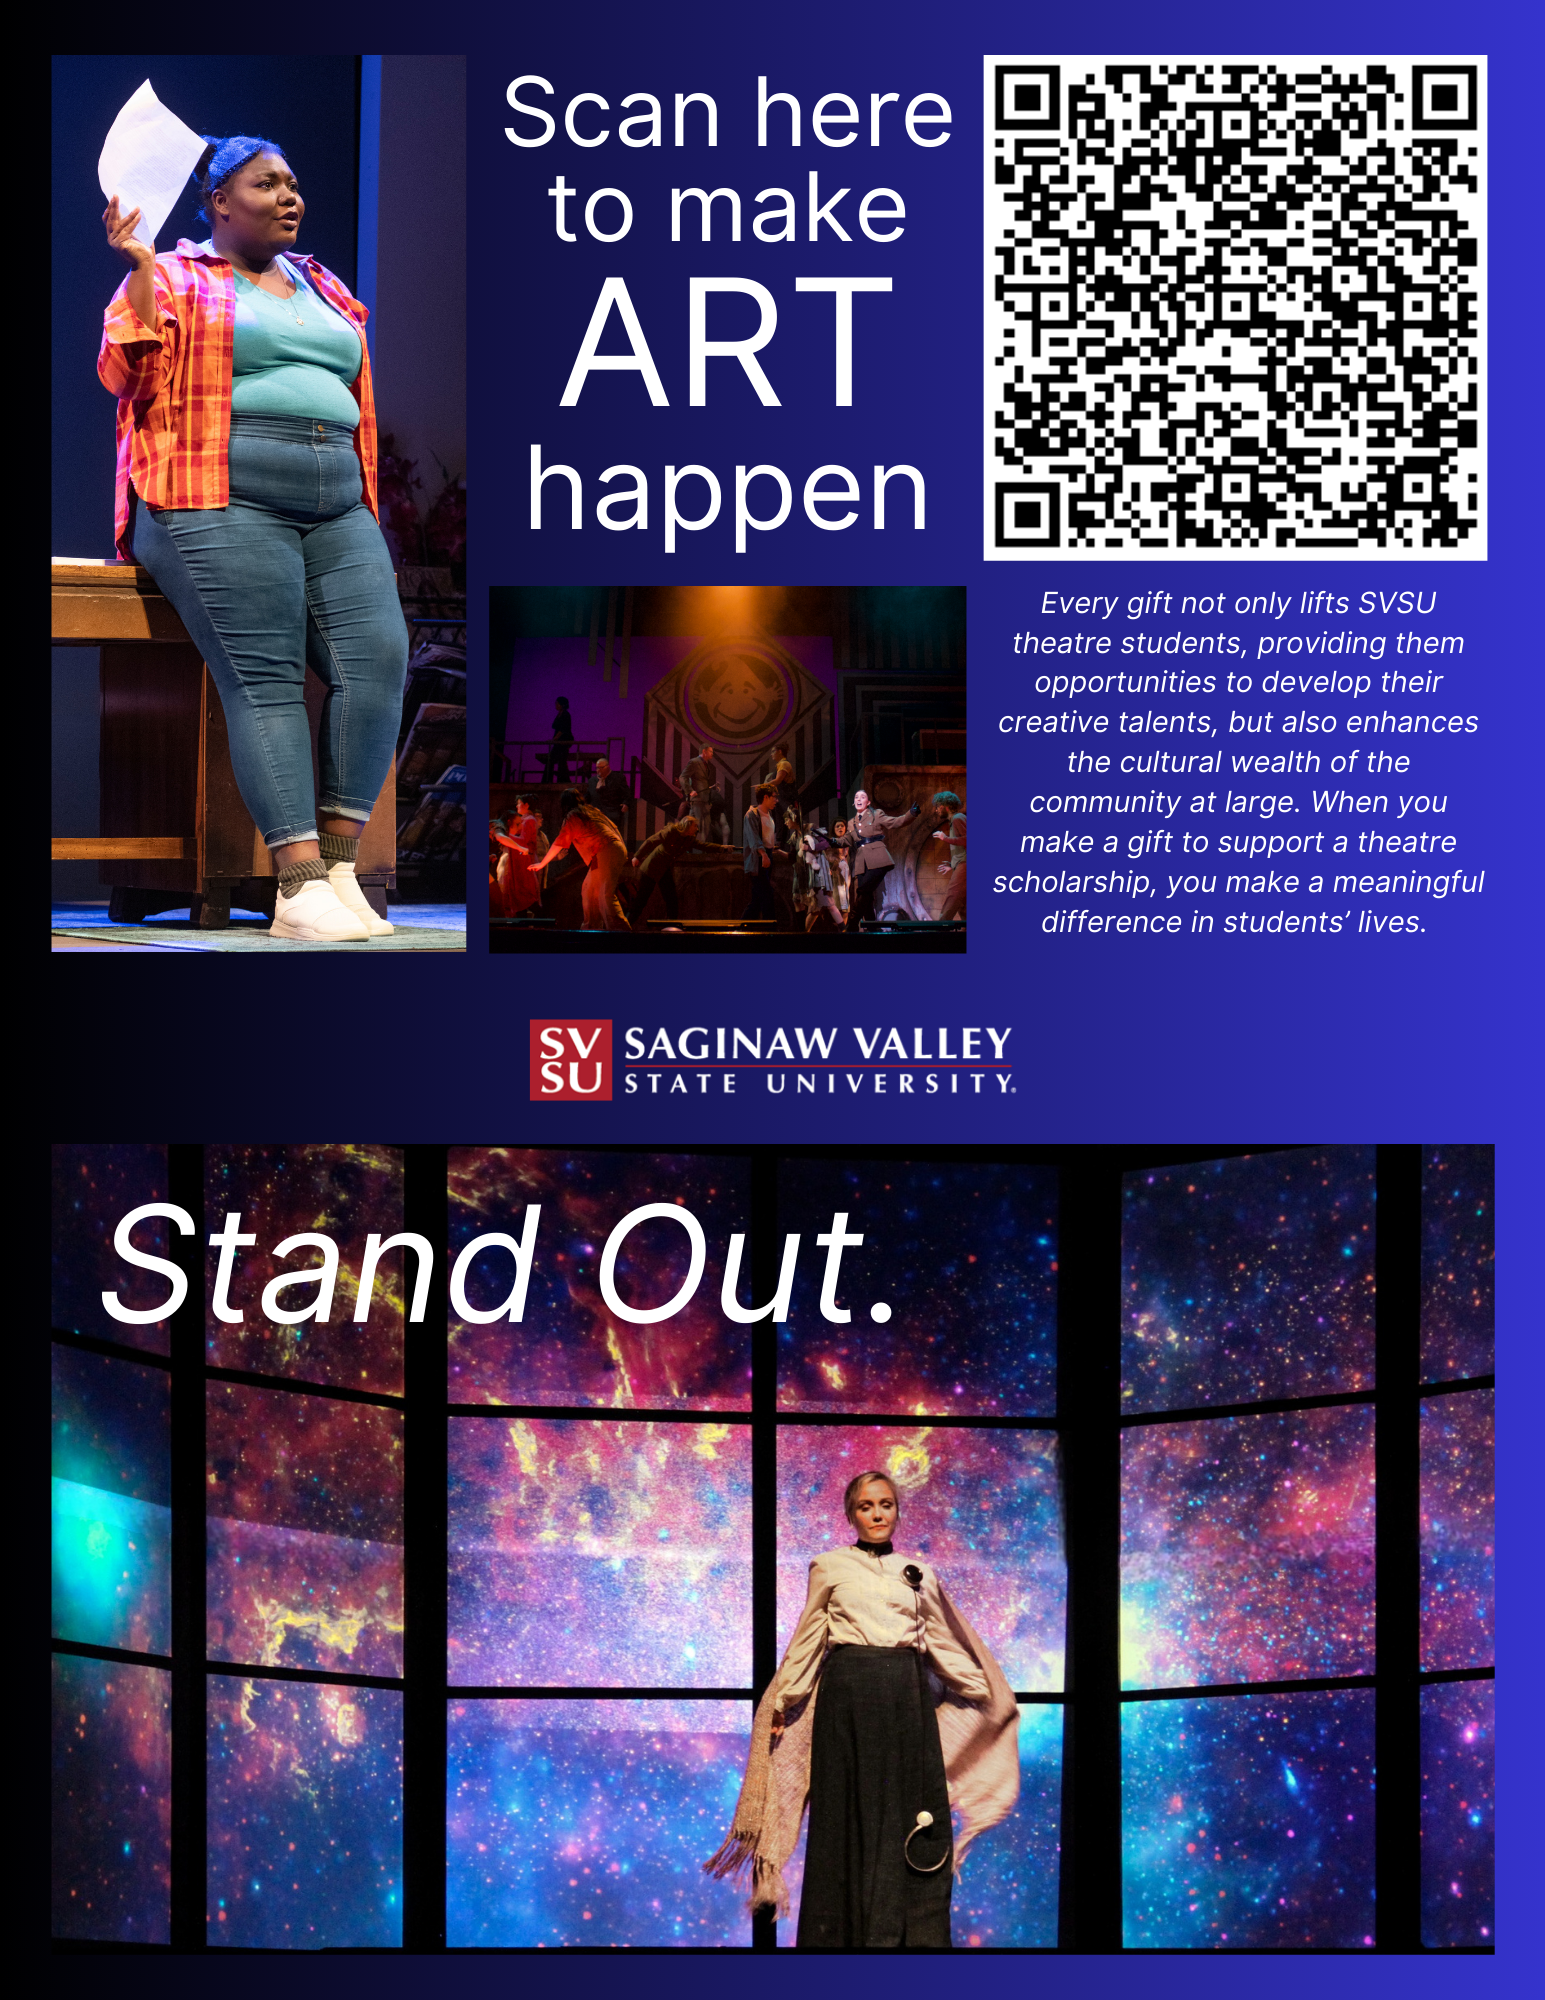 Every gift not only lifts SVSU theatre students, providing them opportunities to develop their creative talents, but also enhances the cultural wealth of the community at large.  When you make a gift to support a theatre scholarship, you make a meaningful difference in students' lives.